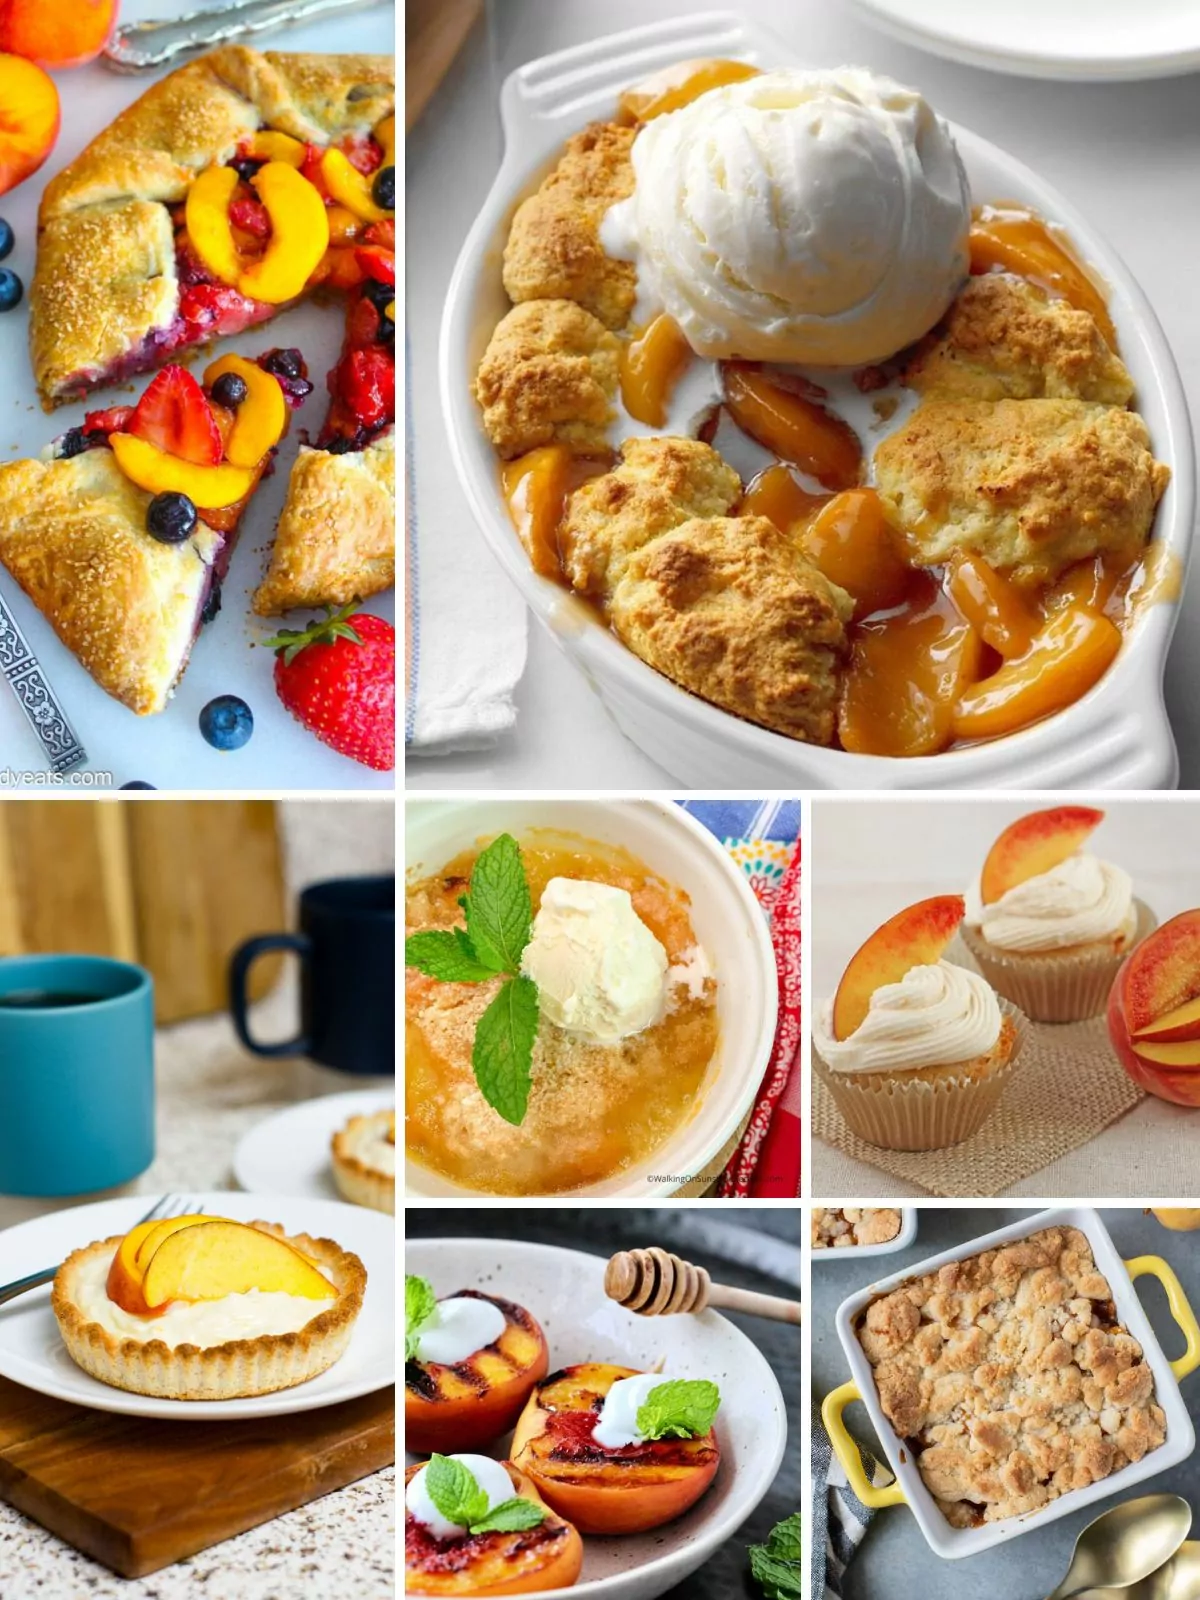 A collection of peach desserts made for two people.